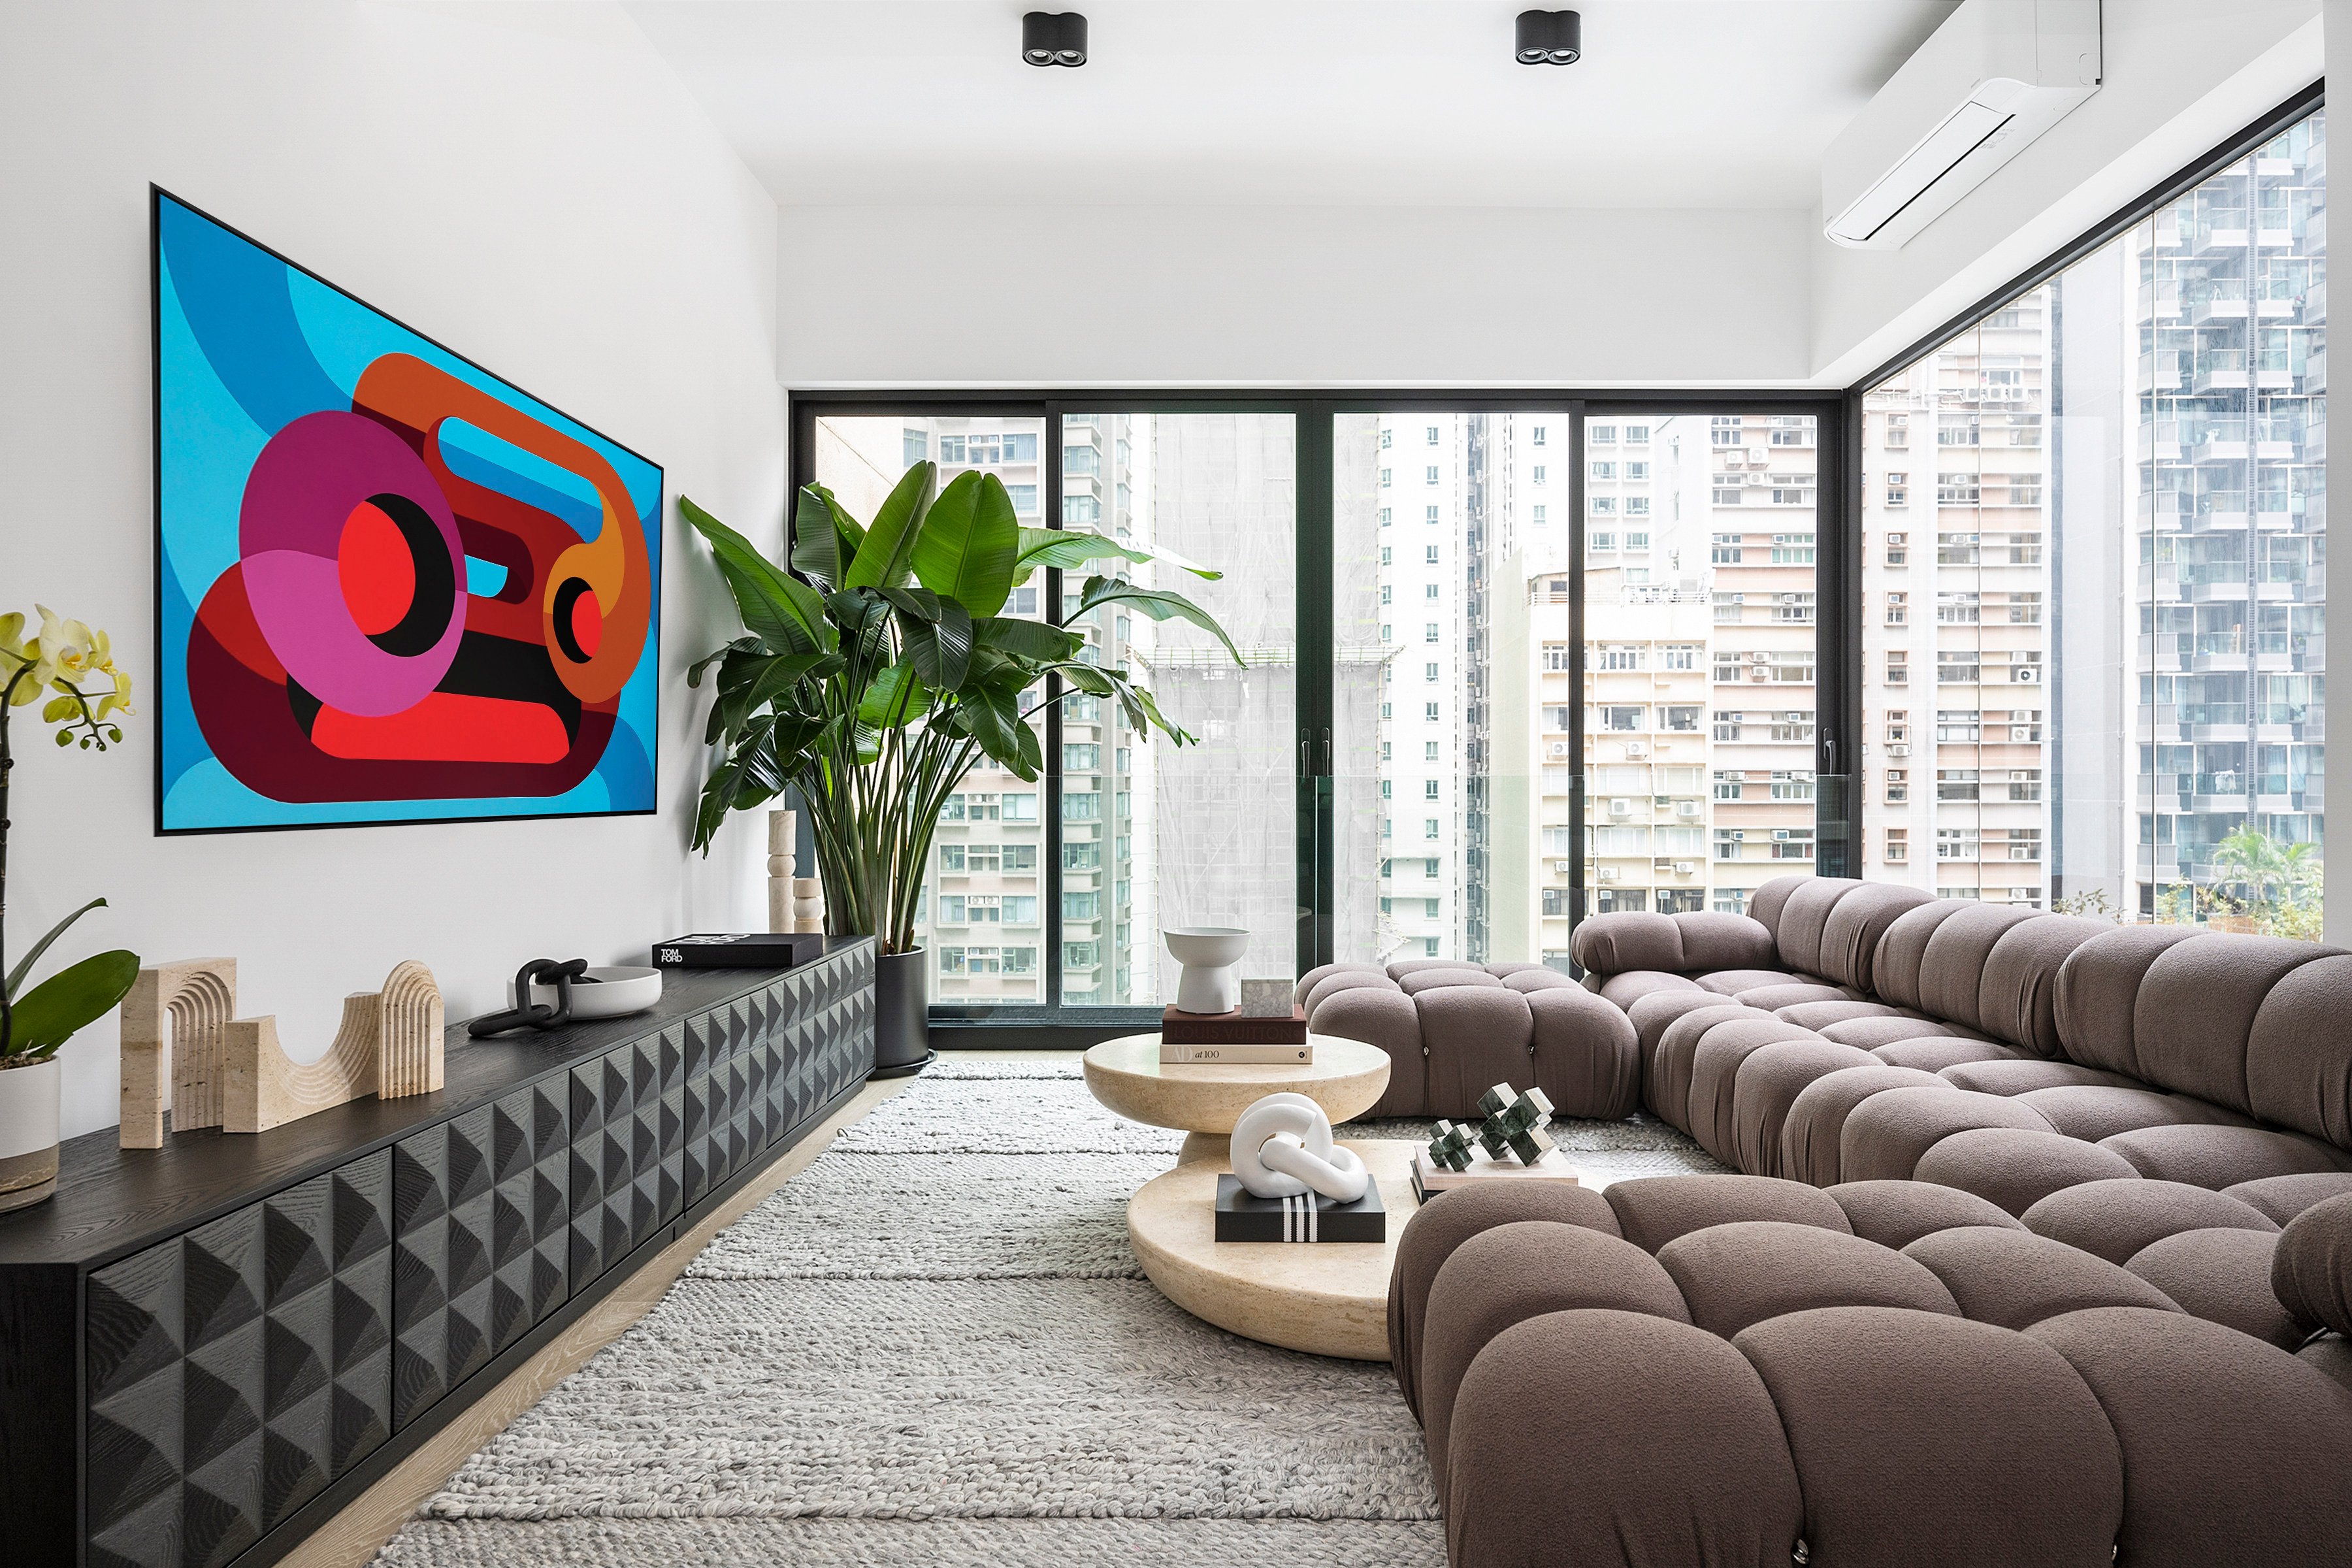 The living room in Eugene Wong’s Hong Kong flat. His home was renovated by his friend, a design enthusiast who fused modern and traditional elements to create a sleek, contemporary home. Photo: Desmond Chan